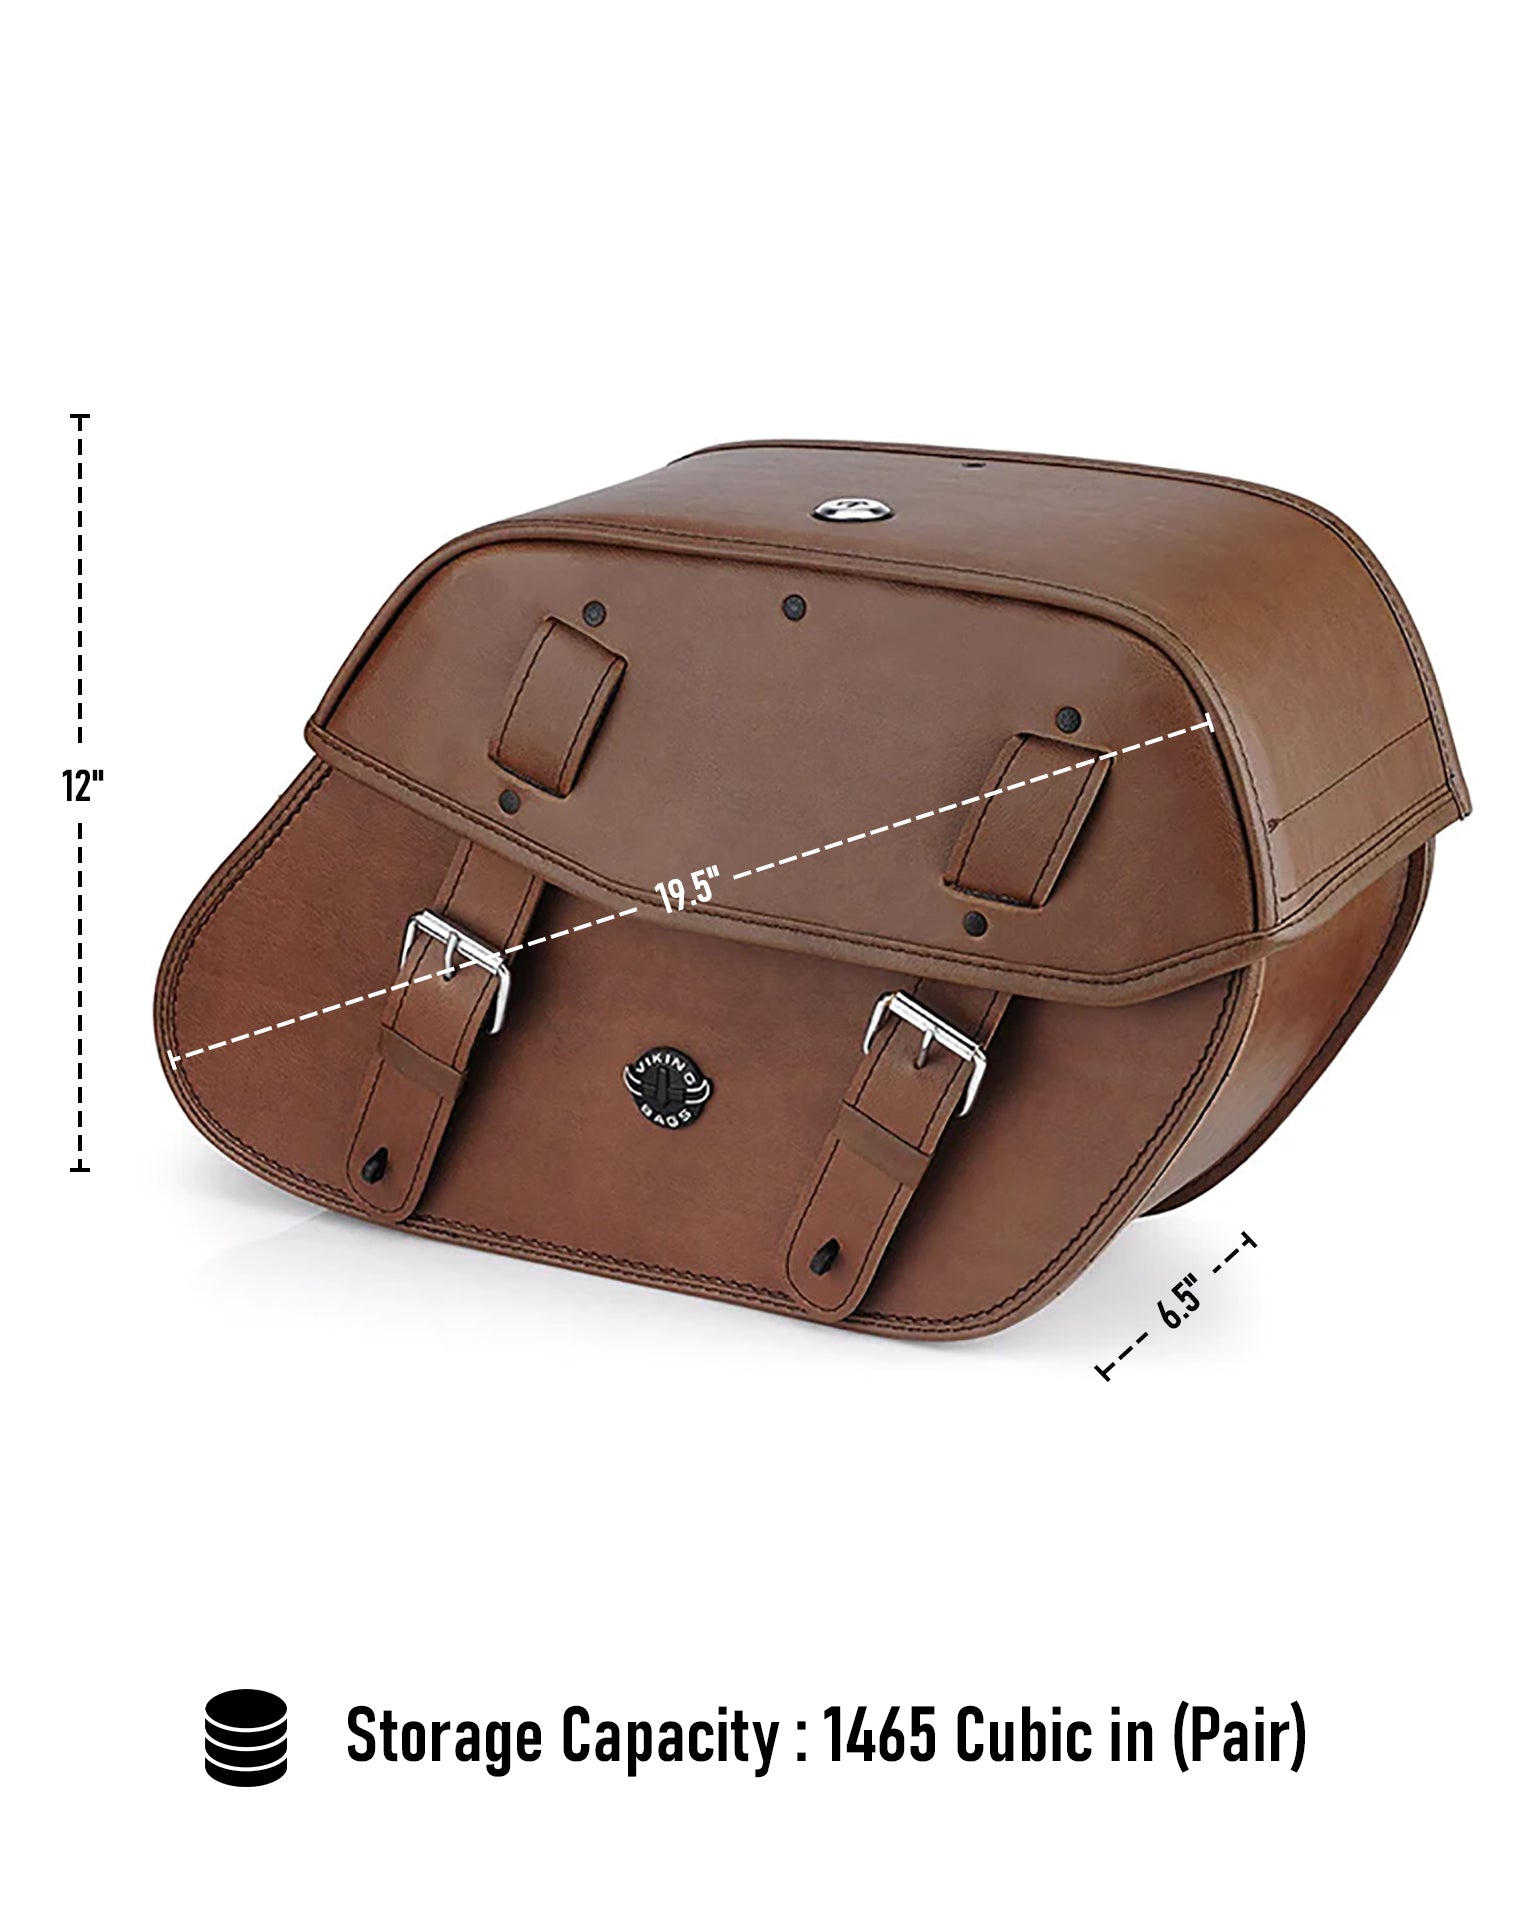 Viking Odin Brown Large Suzuki Boulevard M90 Vz1500 Leather Motorcycle Saddlebags Can Store Your Ridings Gears